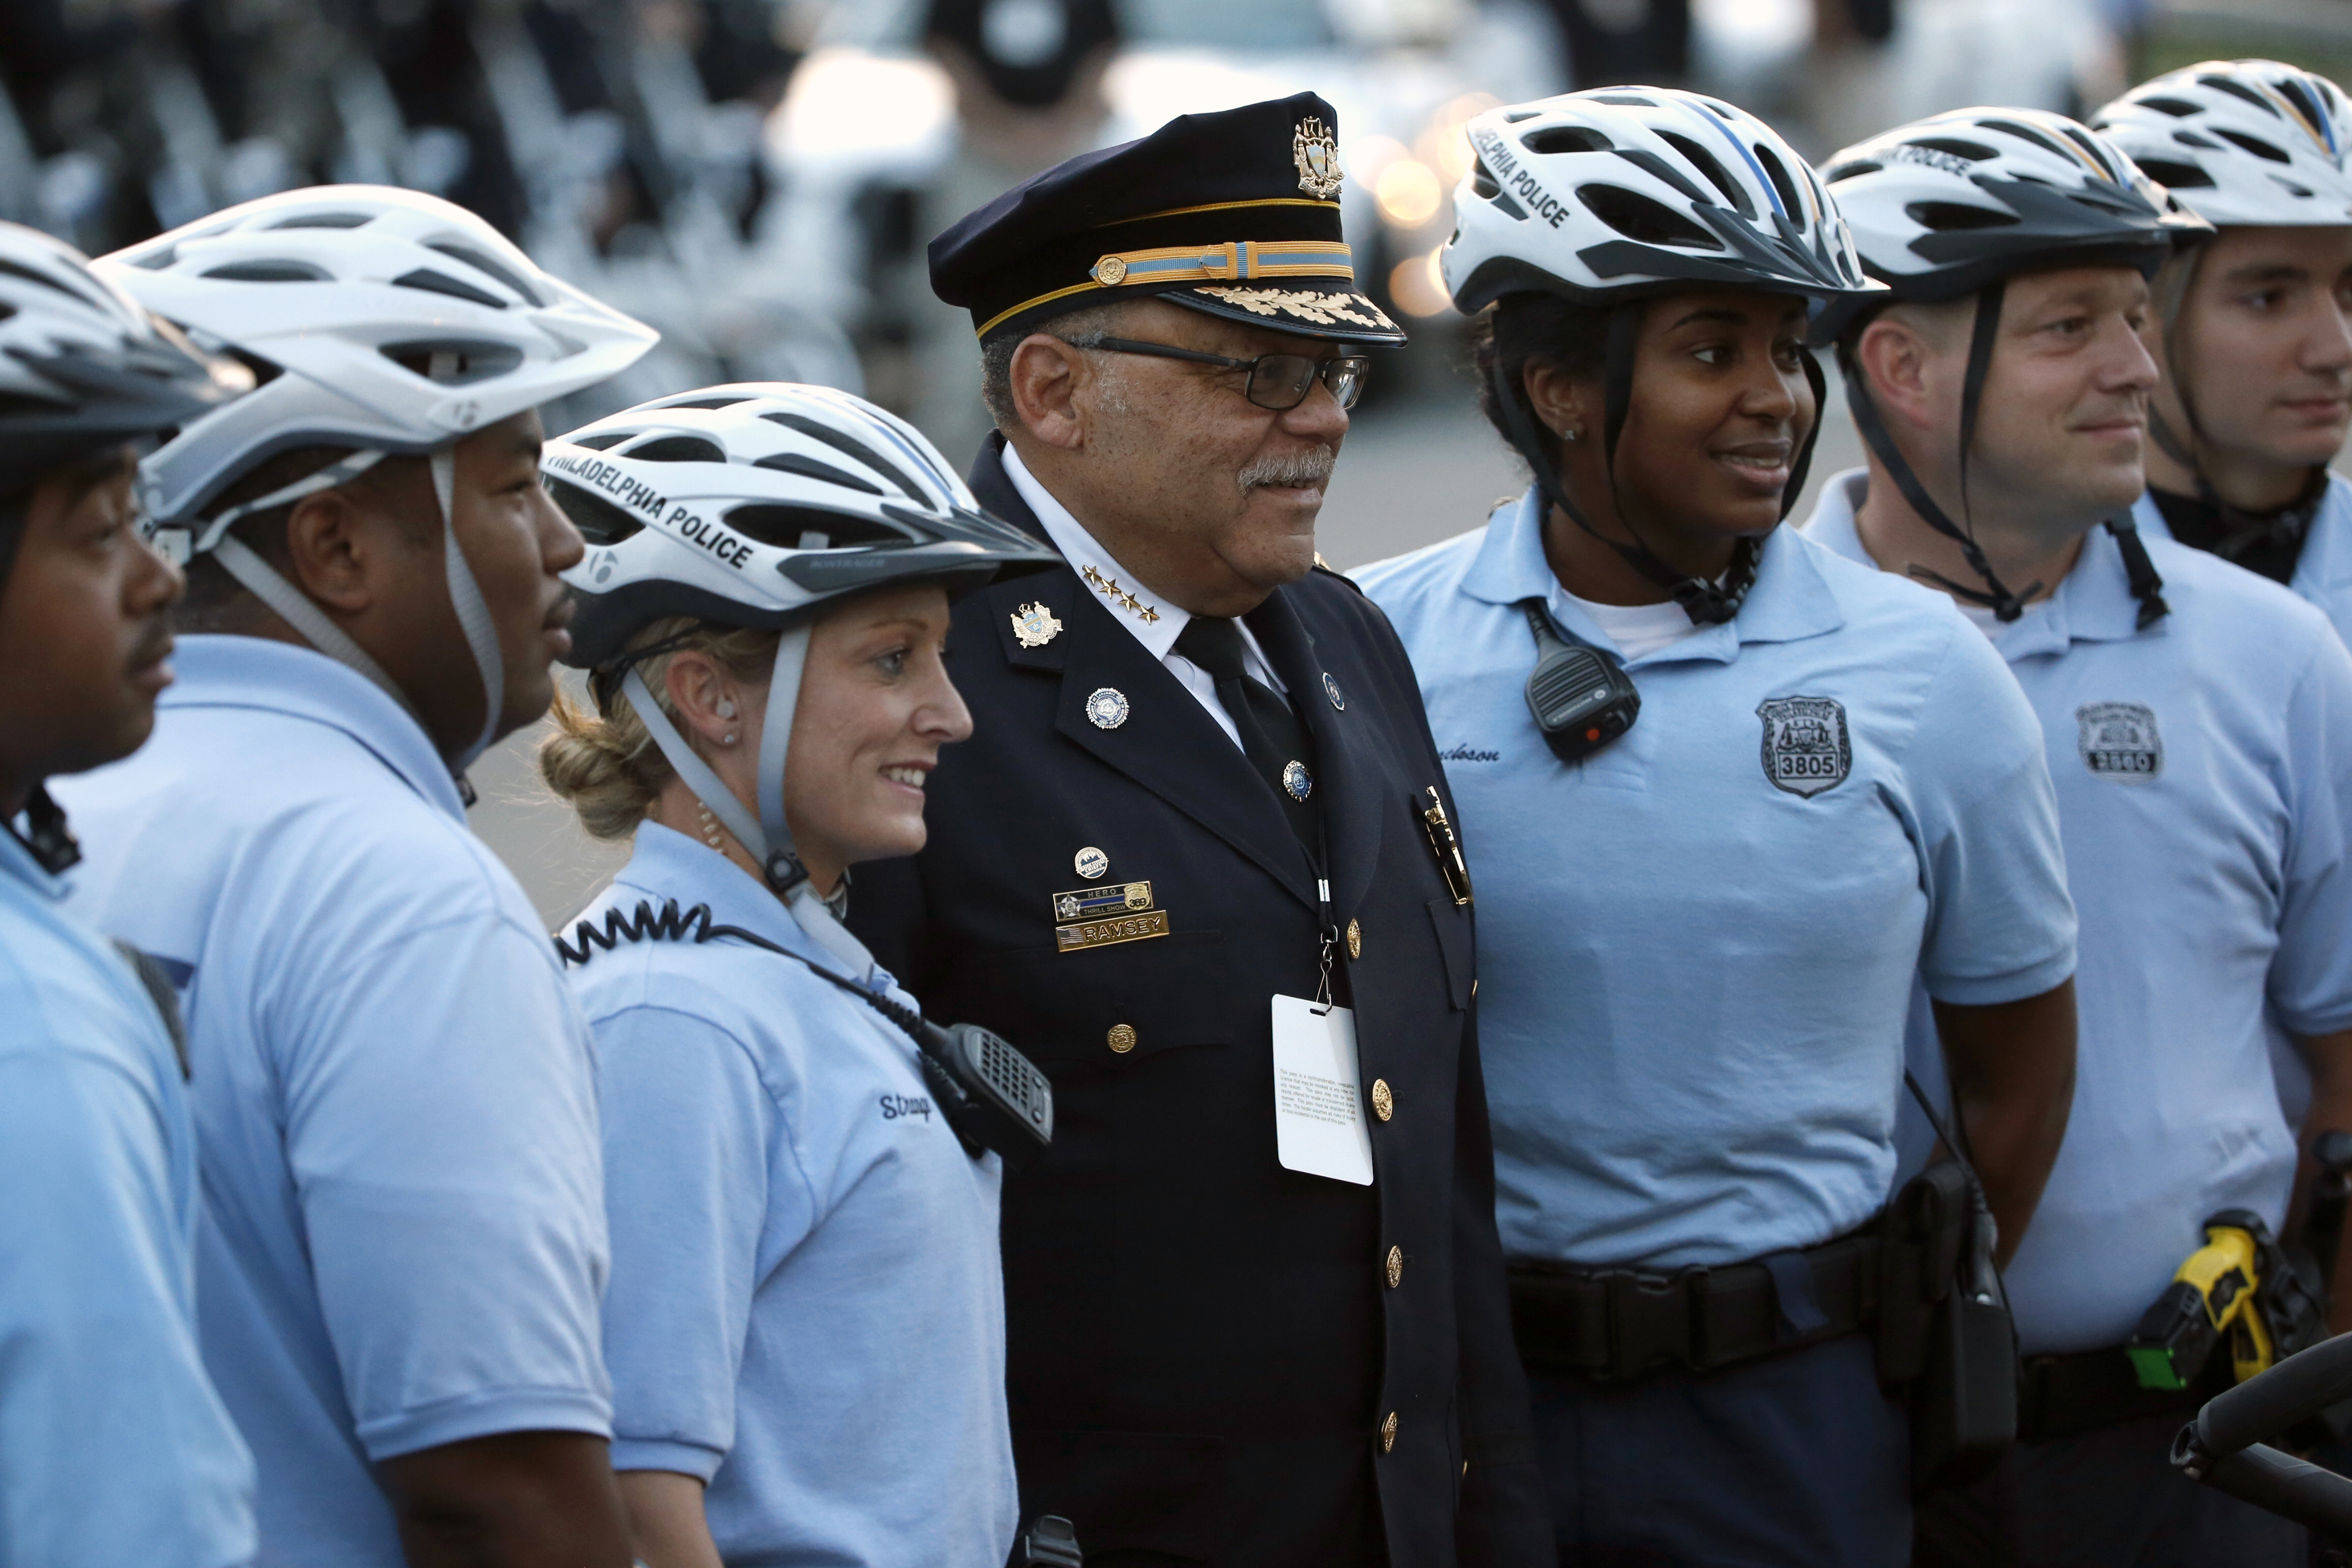 Philadelphia Police Commissioner Charles Ramsey poses with other police officers Saturday, Sept. 26, 2015, in Philadelphia. (AP Photo/Pablo Martinez Monsivais, Pool)